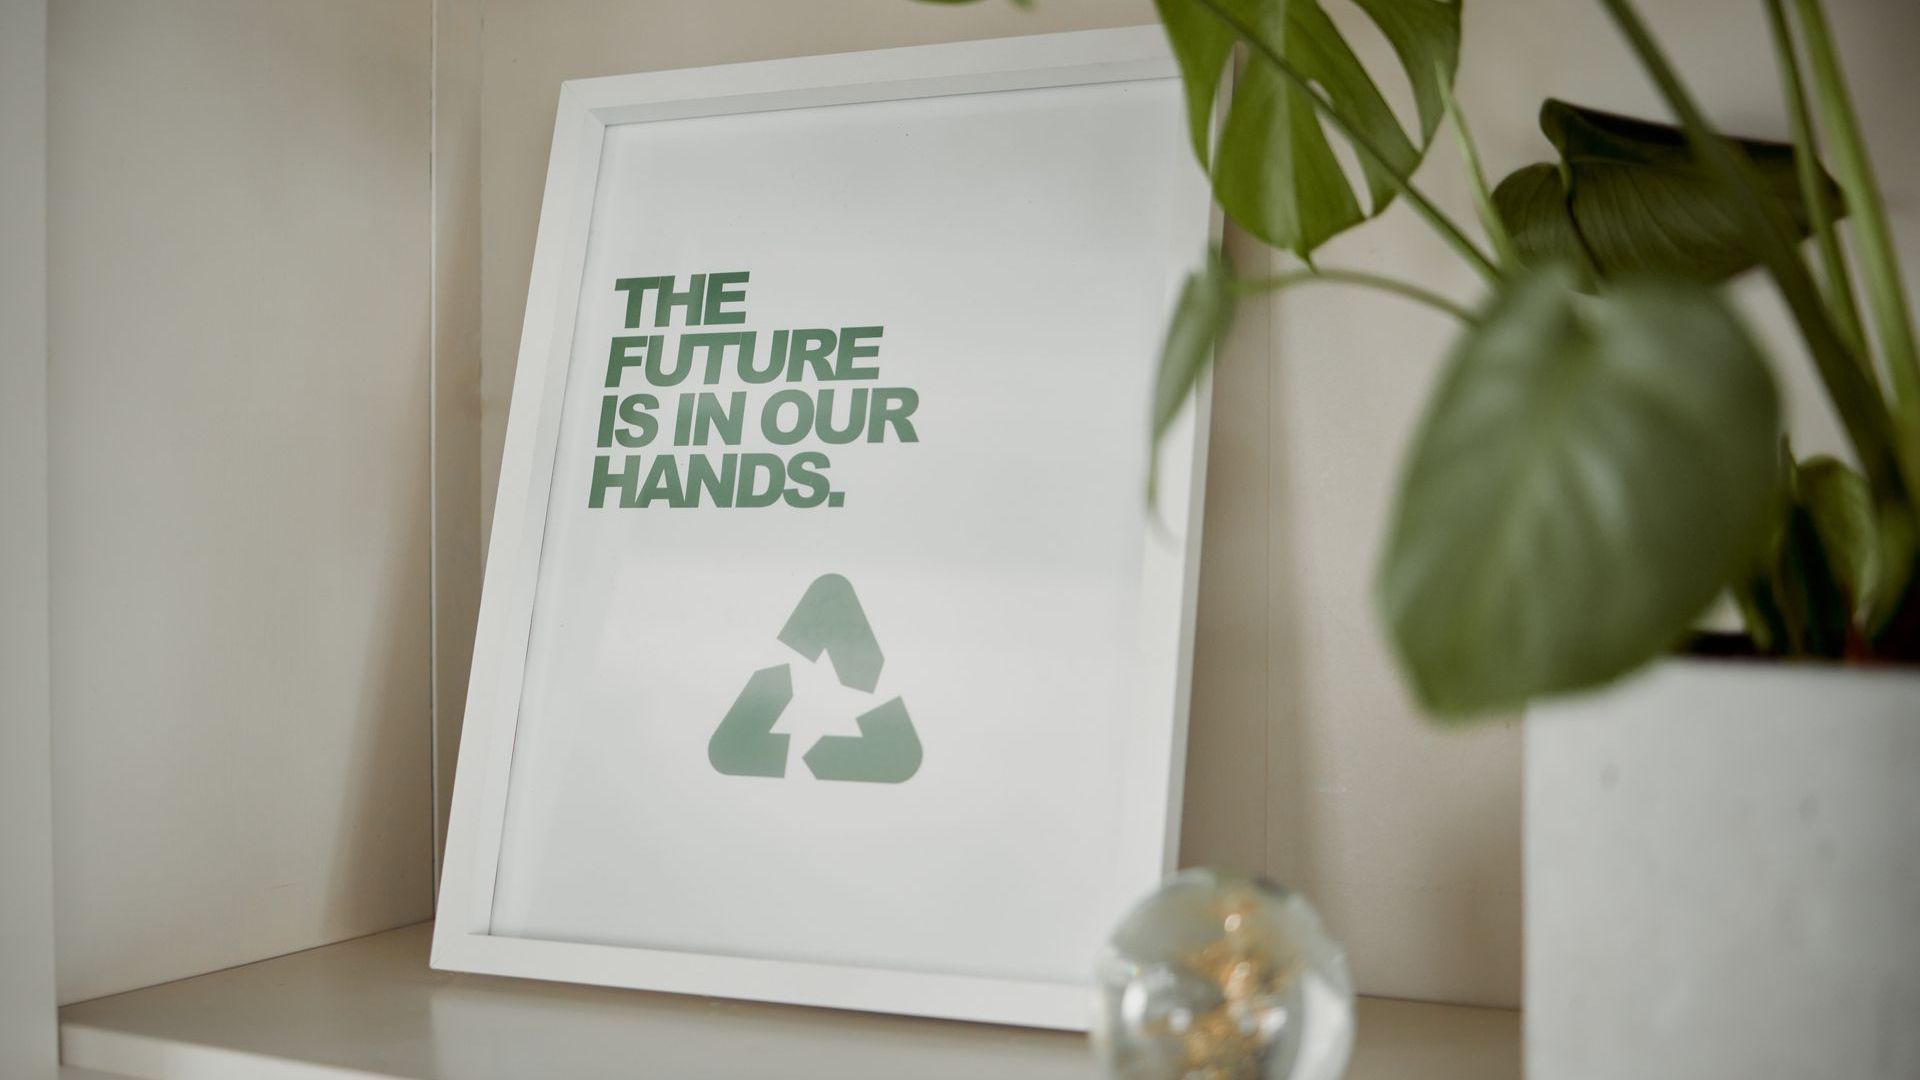 Close up of a framed sign that says THE FUTURE IS IN OUR HANDS with a recycled icon under